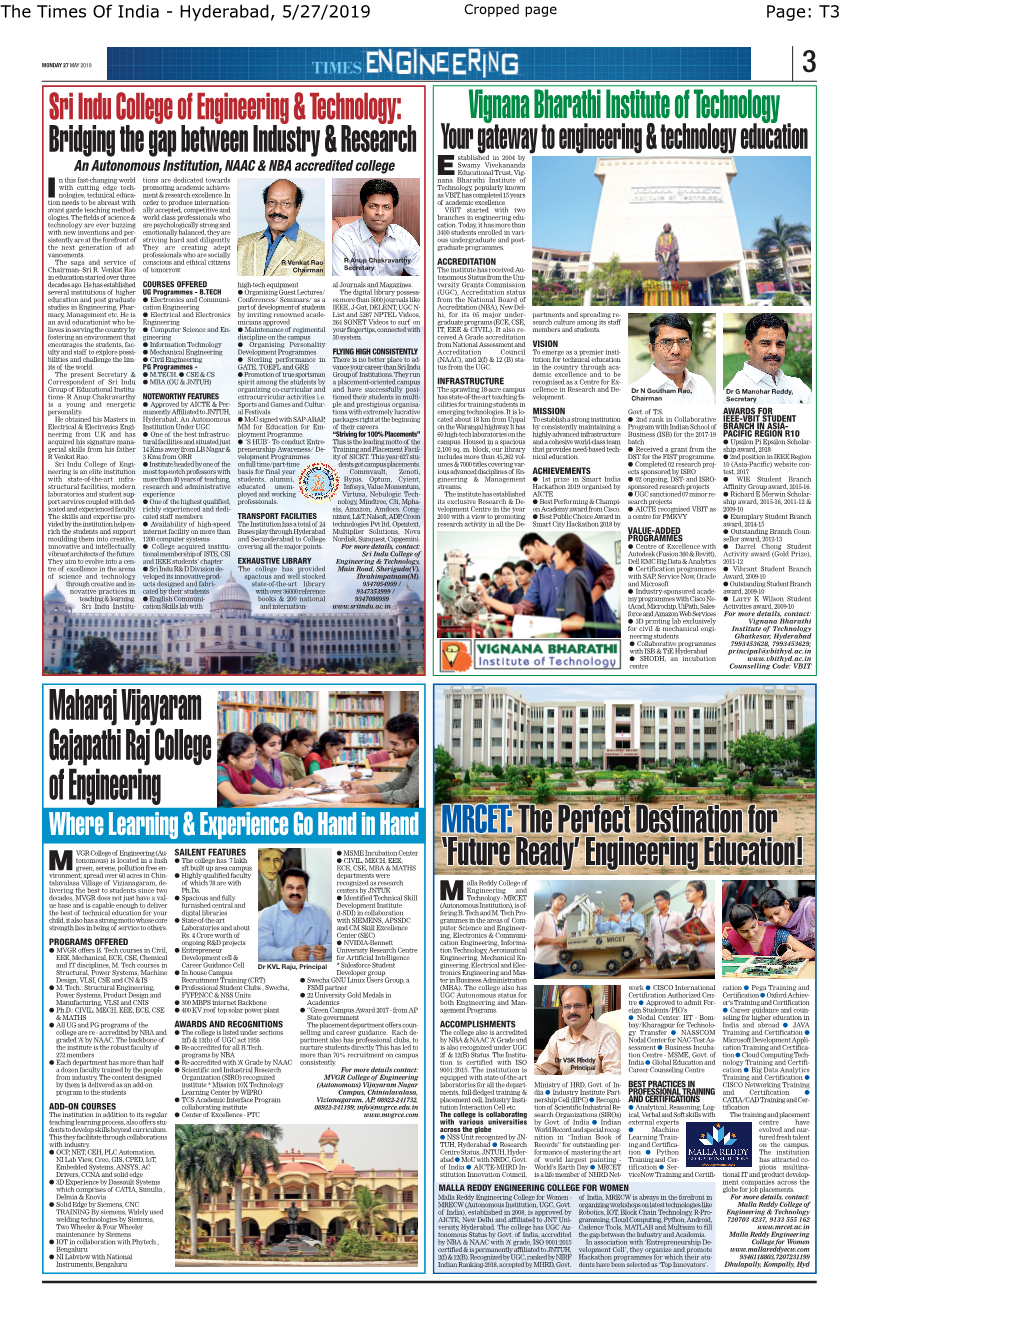 Hyderabad News Article on Sri Indu College of Engineering & Technology